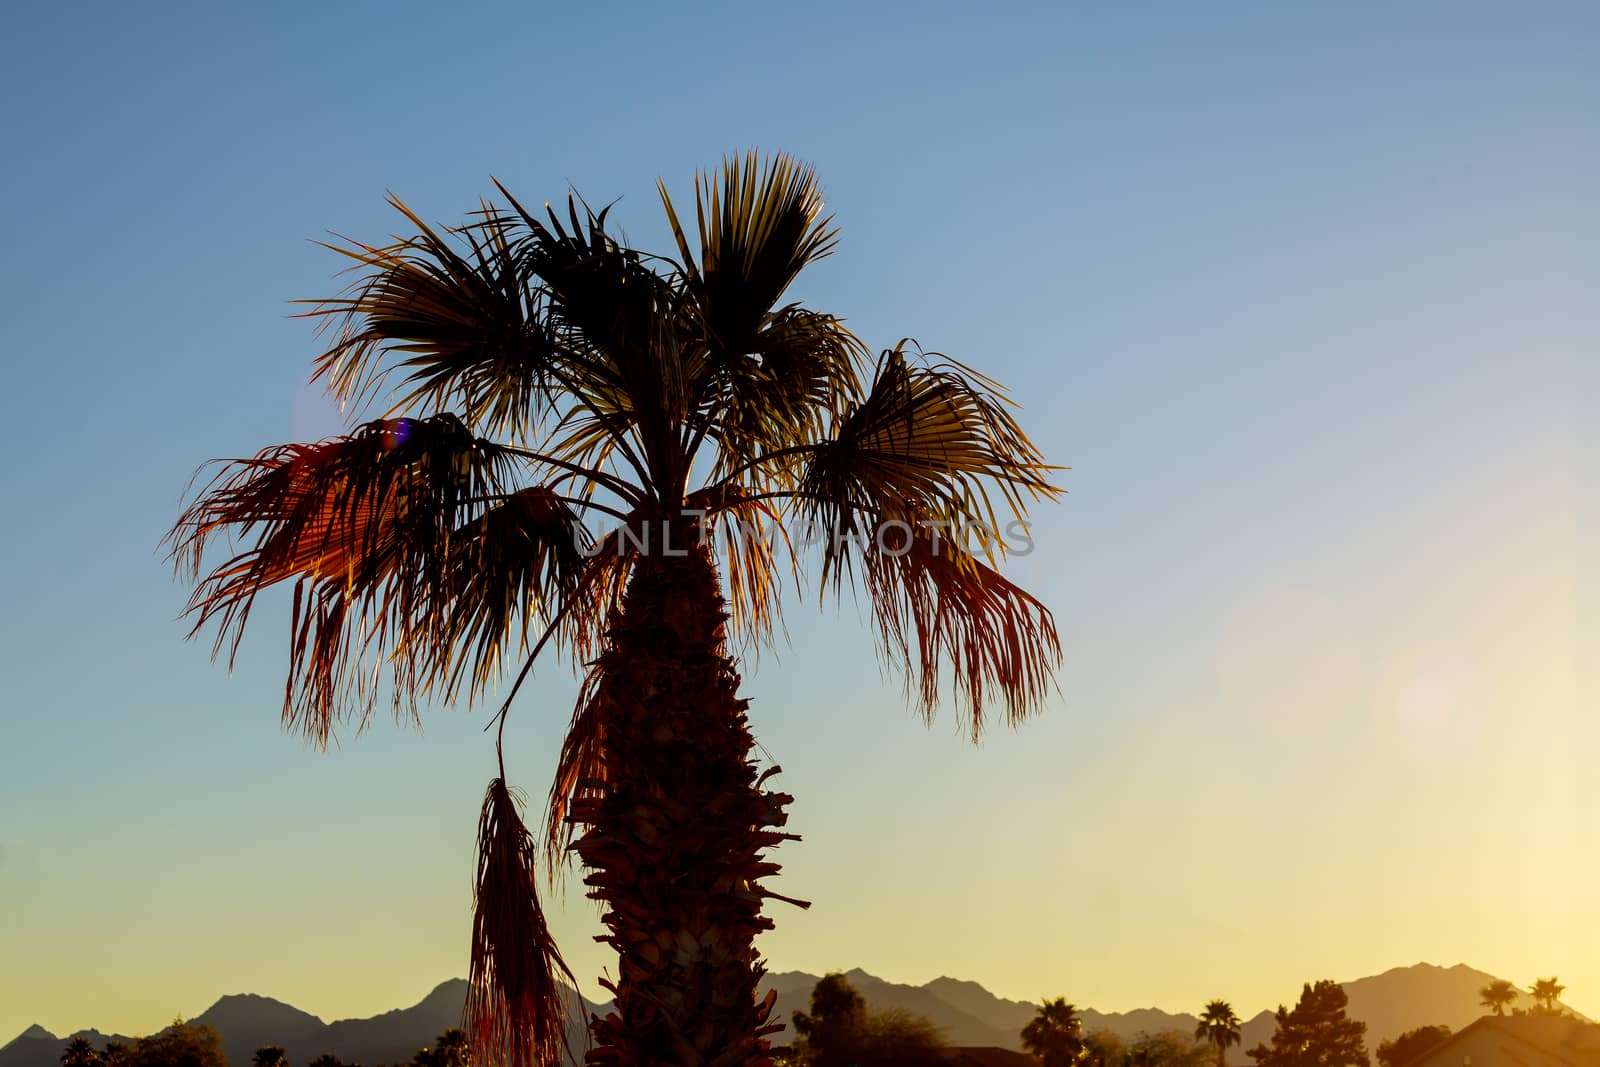 Silhouettes of palm trees at sunset in Arizona by ungvar